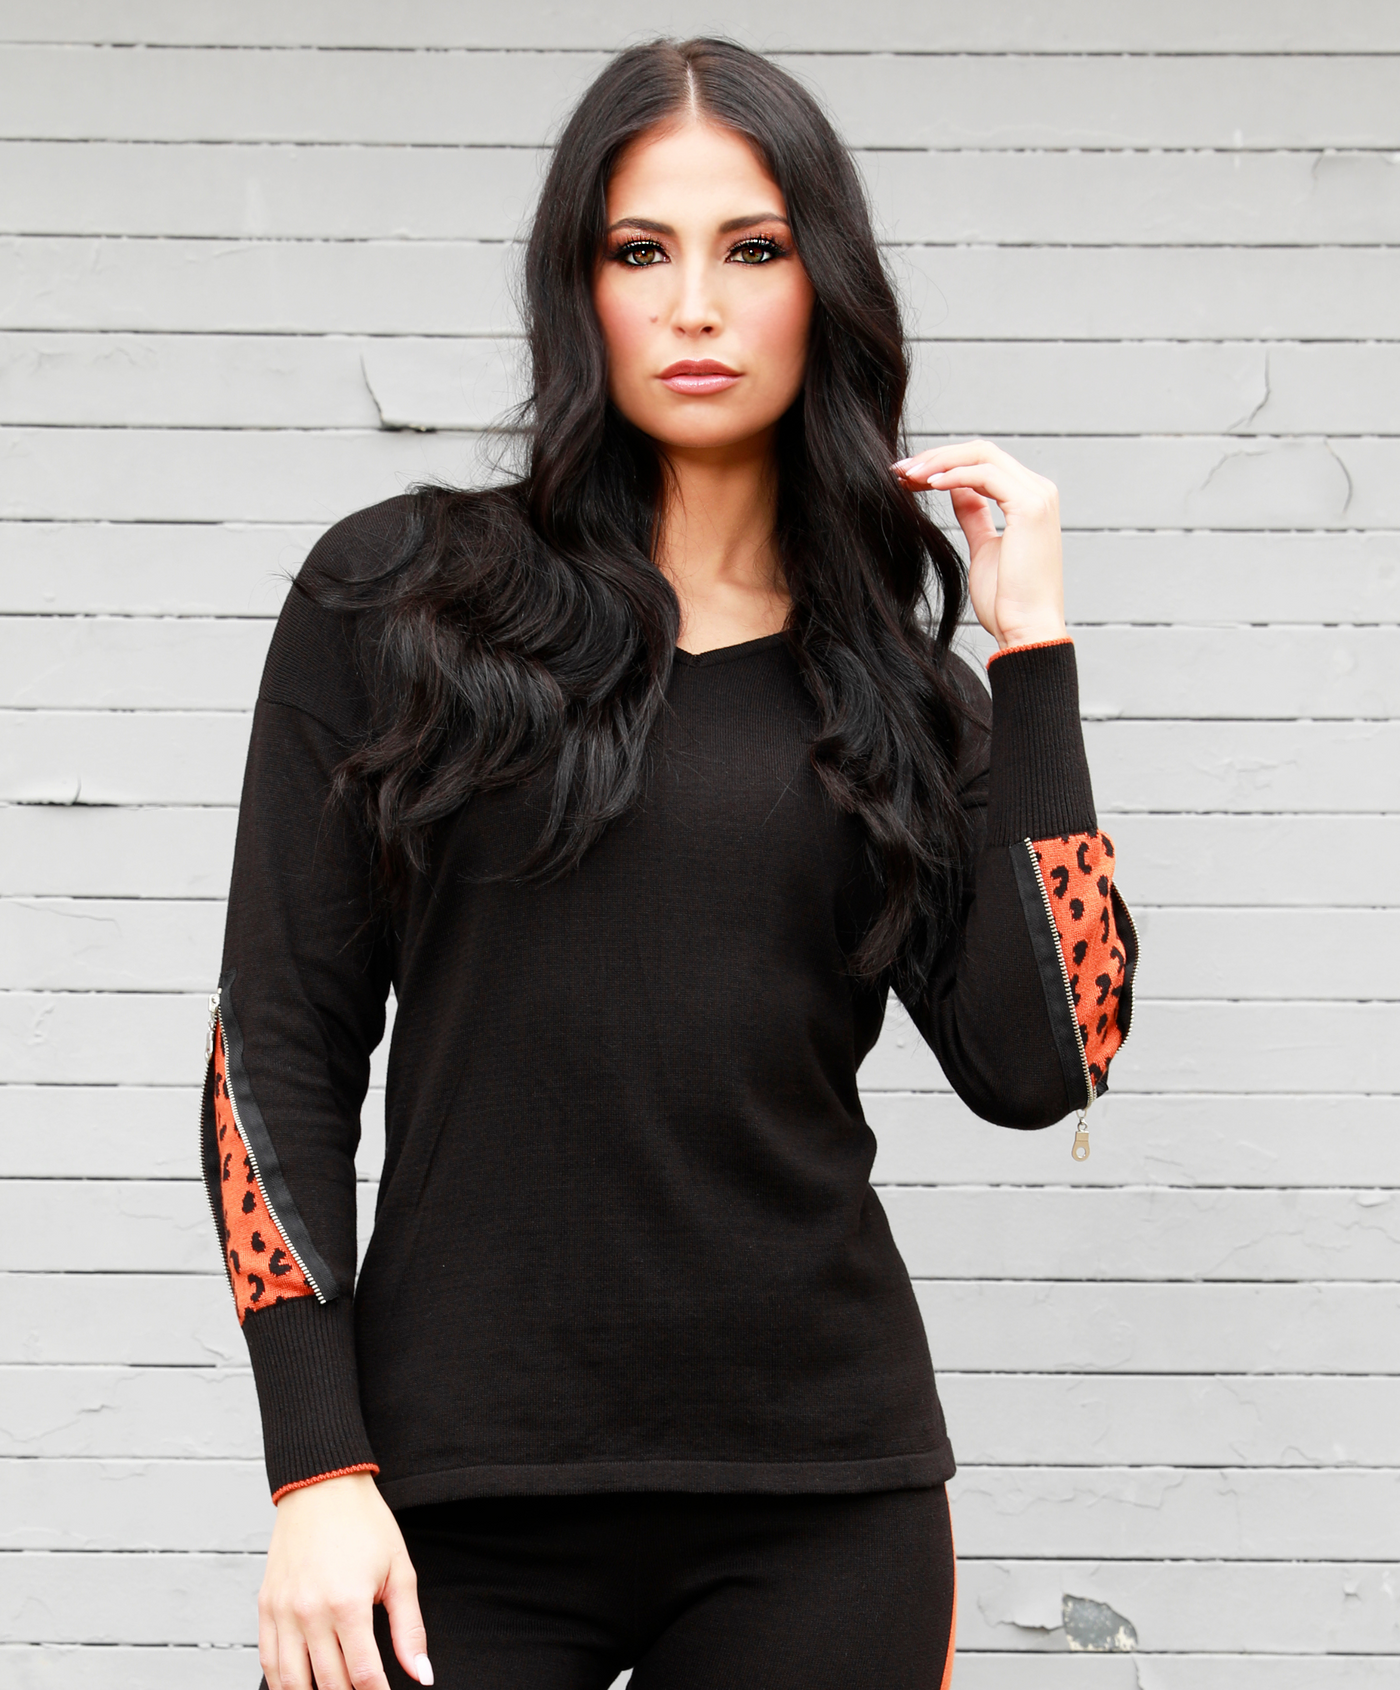 Cheetah V-Neck Sweater with Zip Sleeves